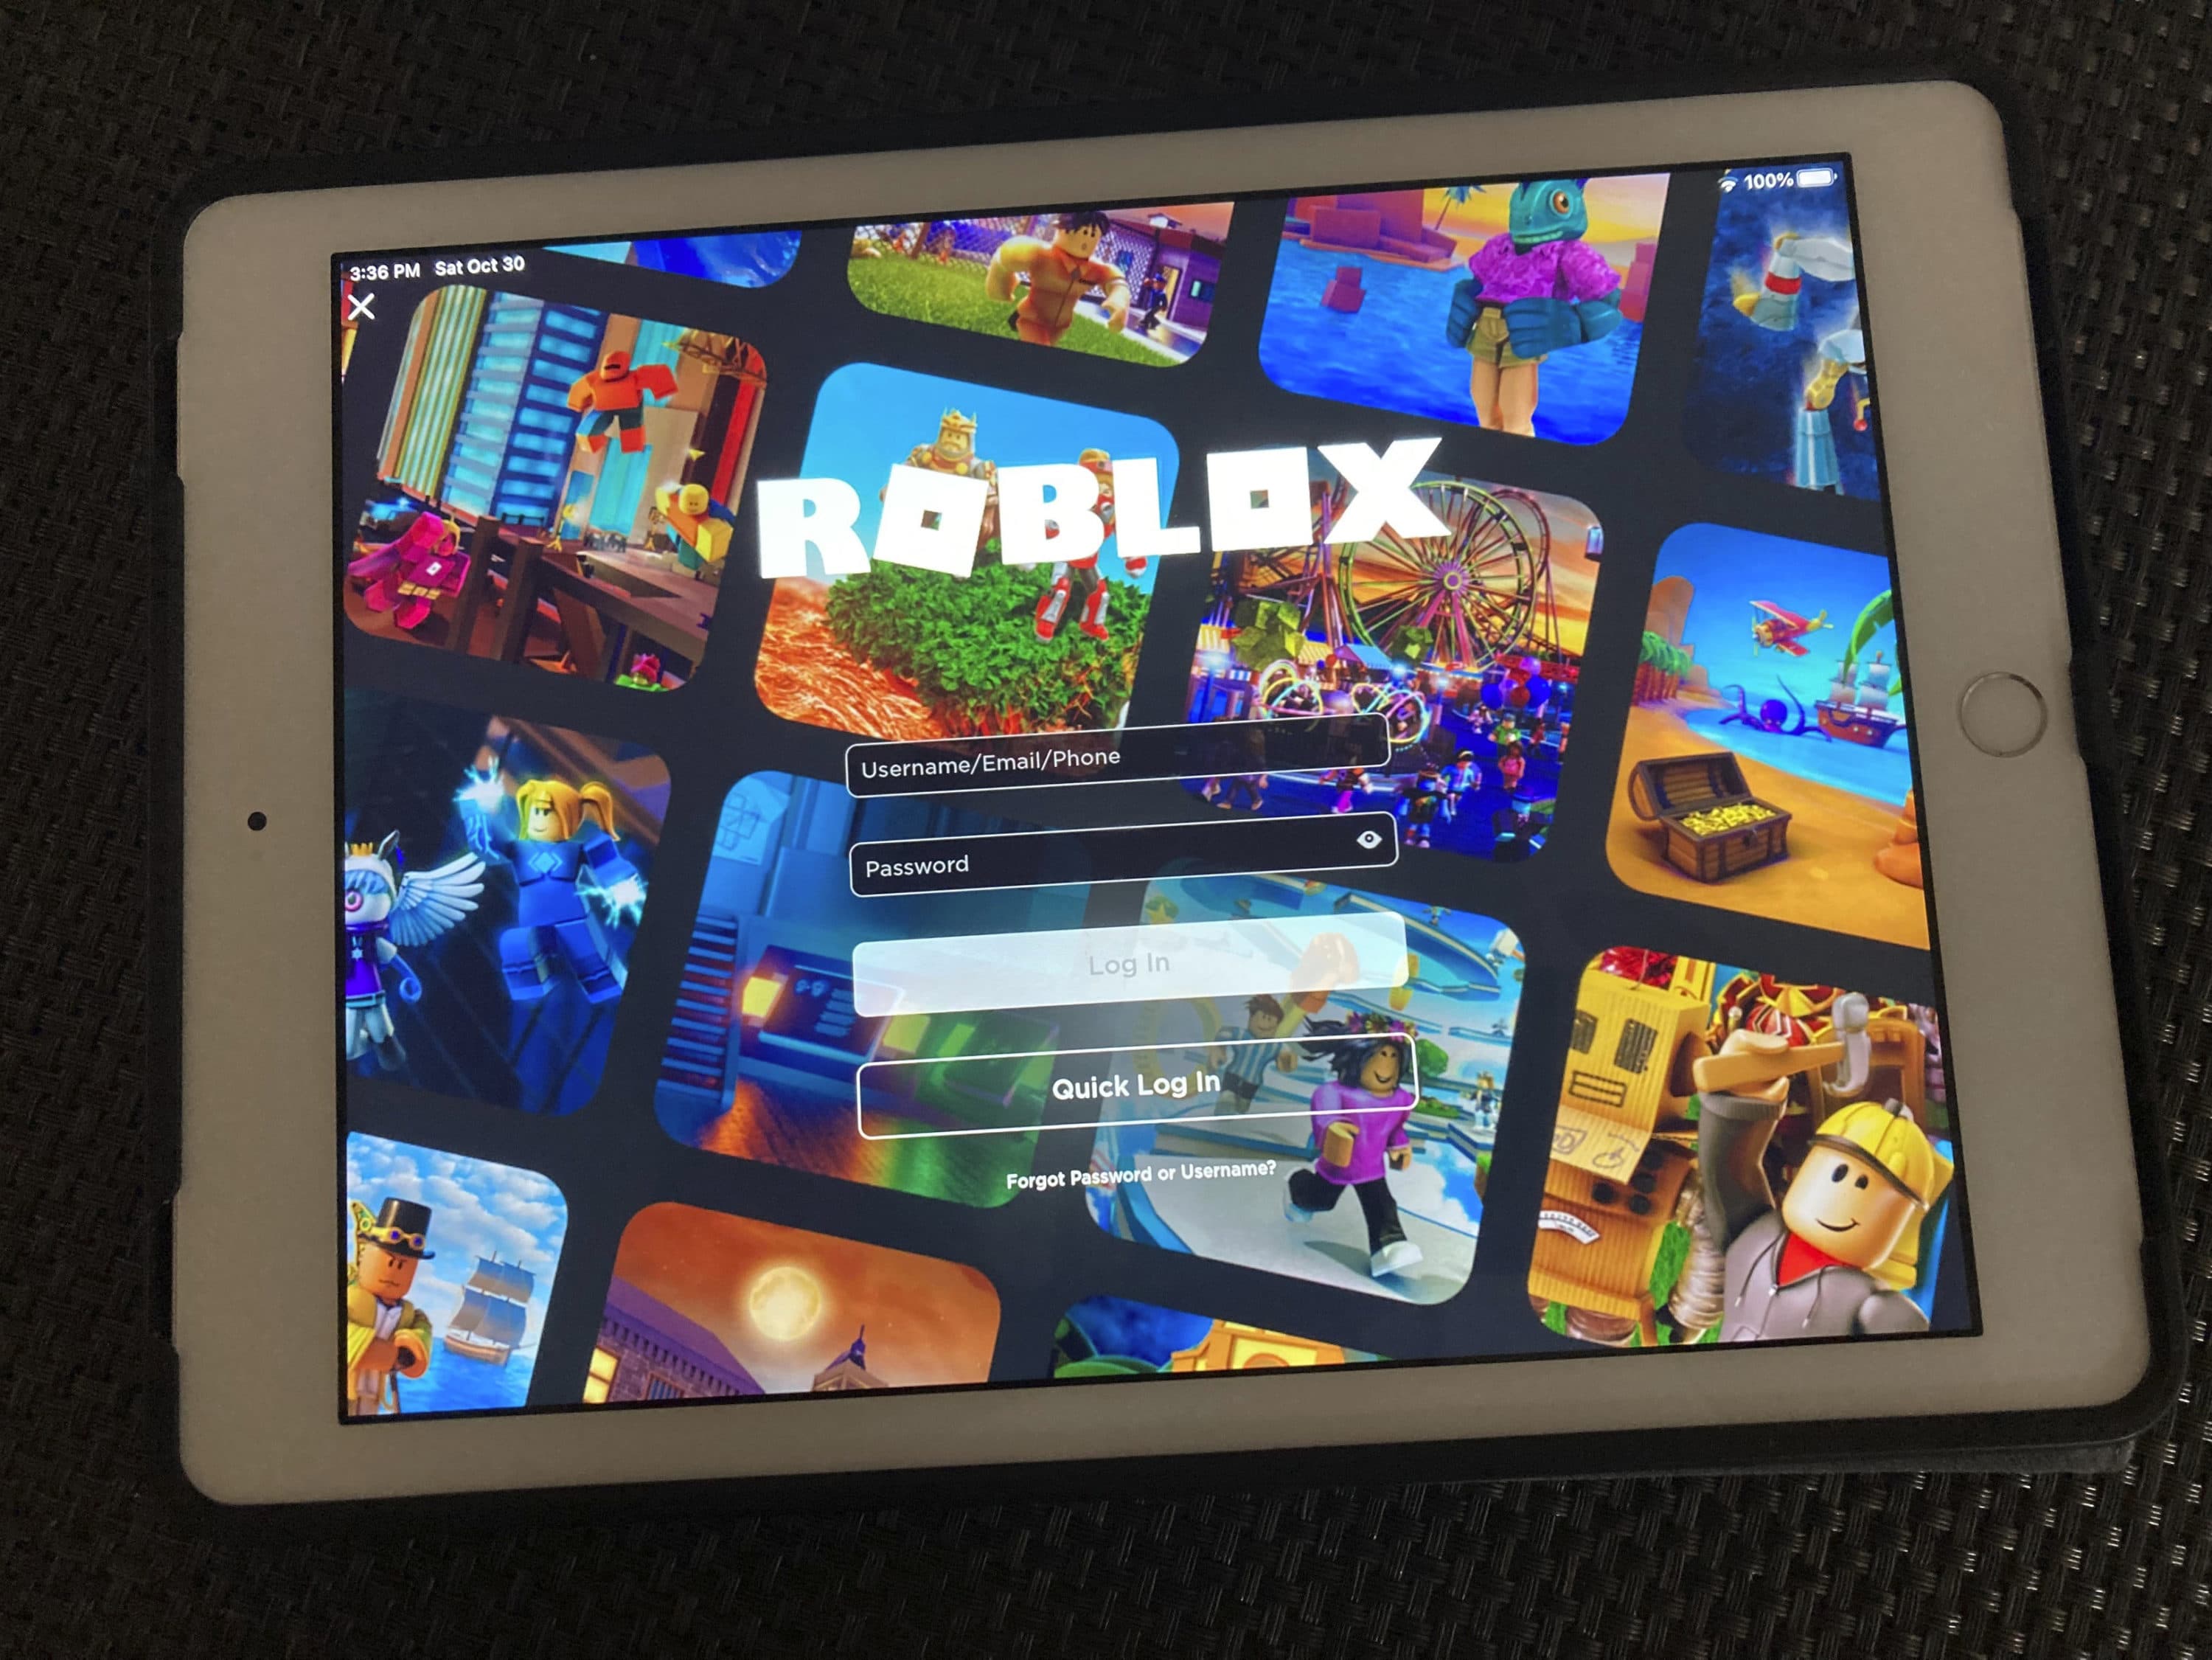 I bought robux on roblox and didn't get i… - Apple Community